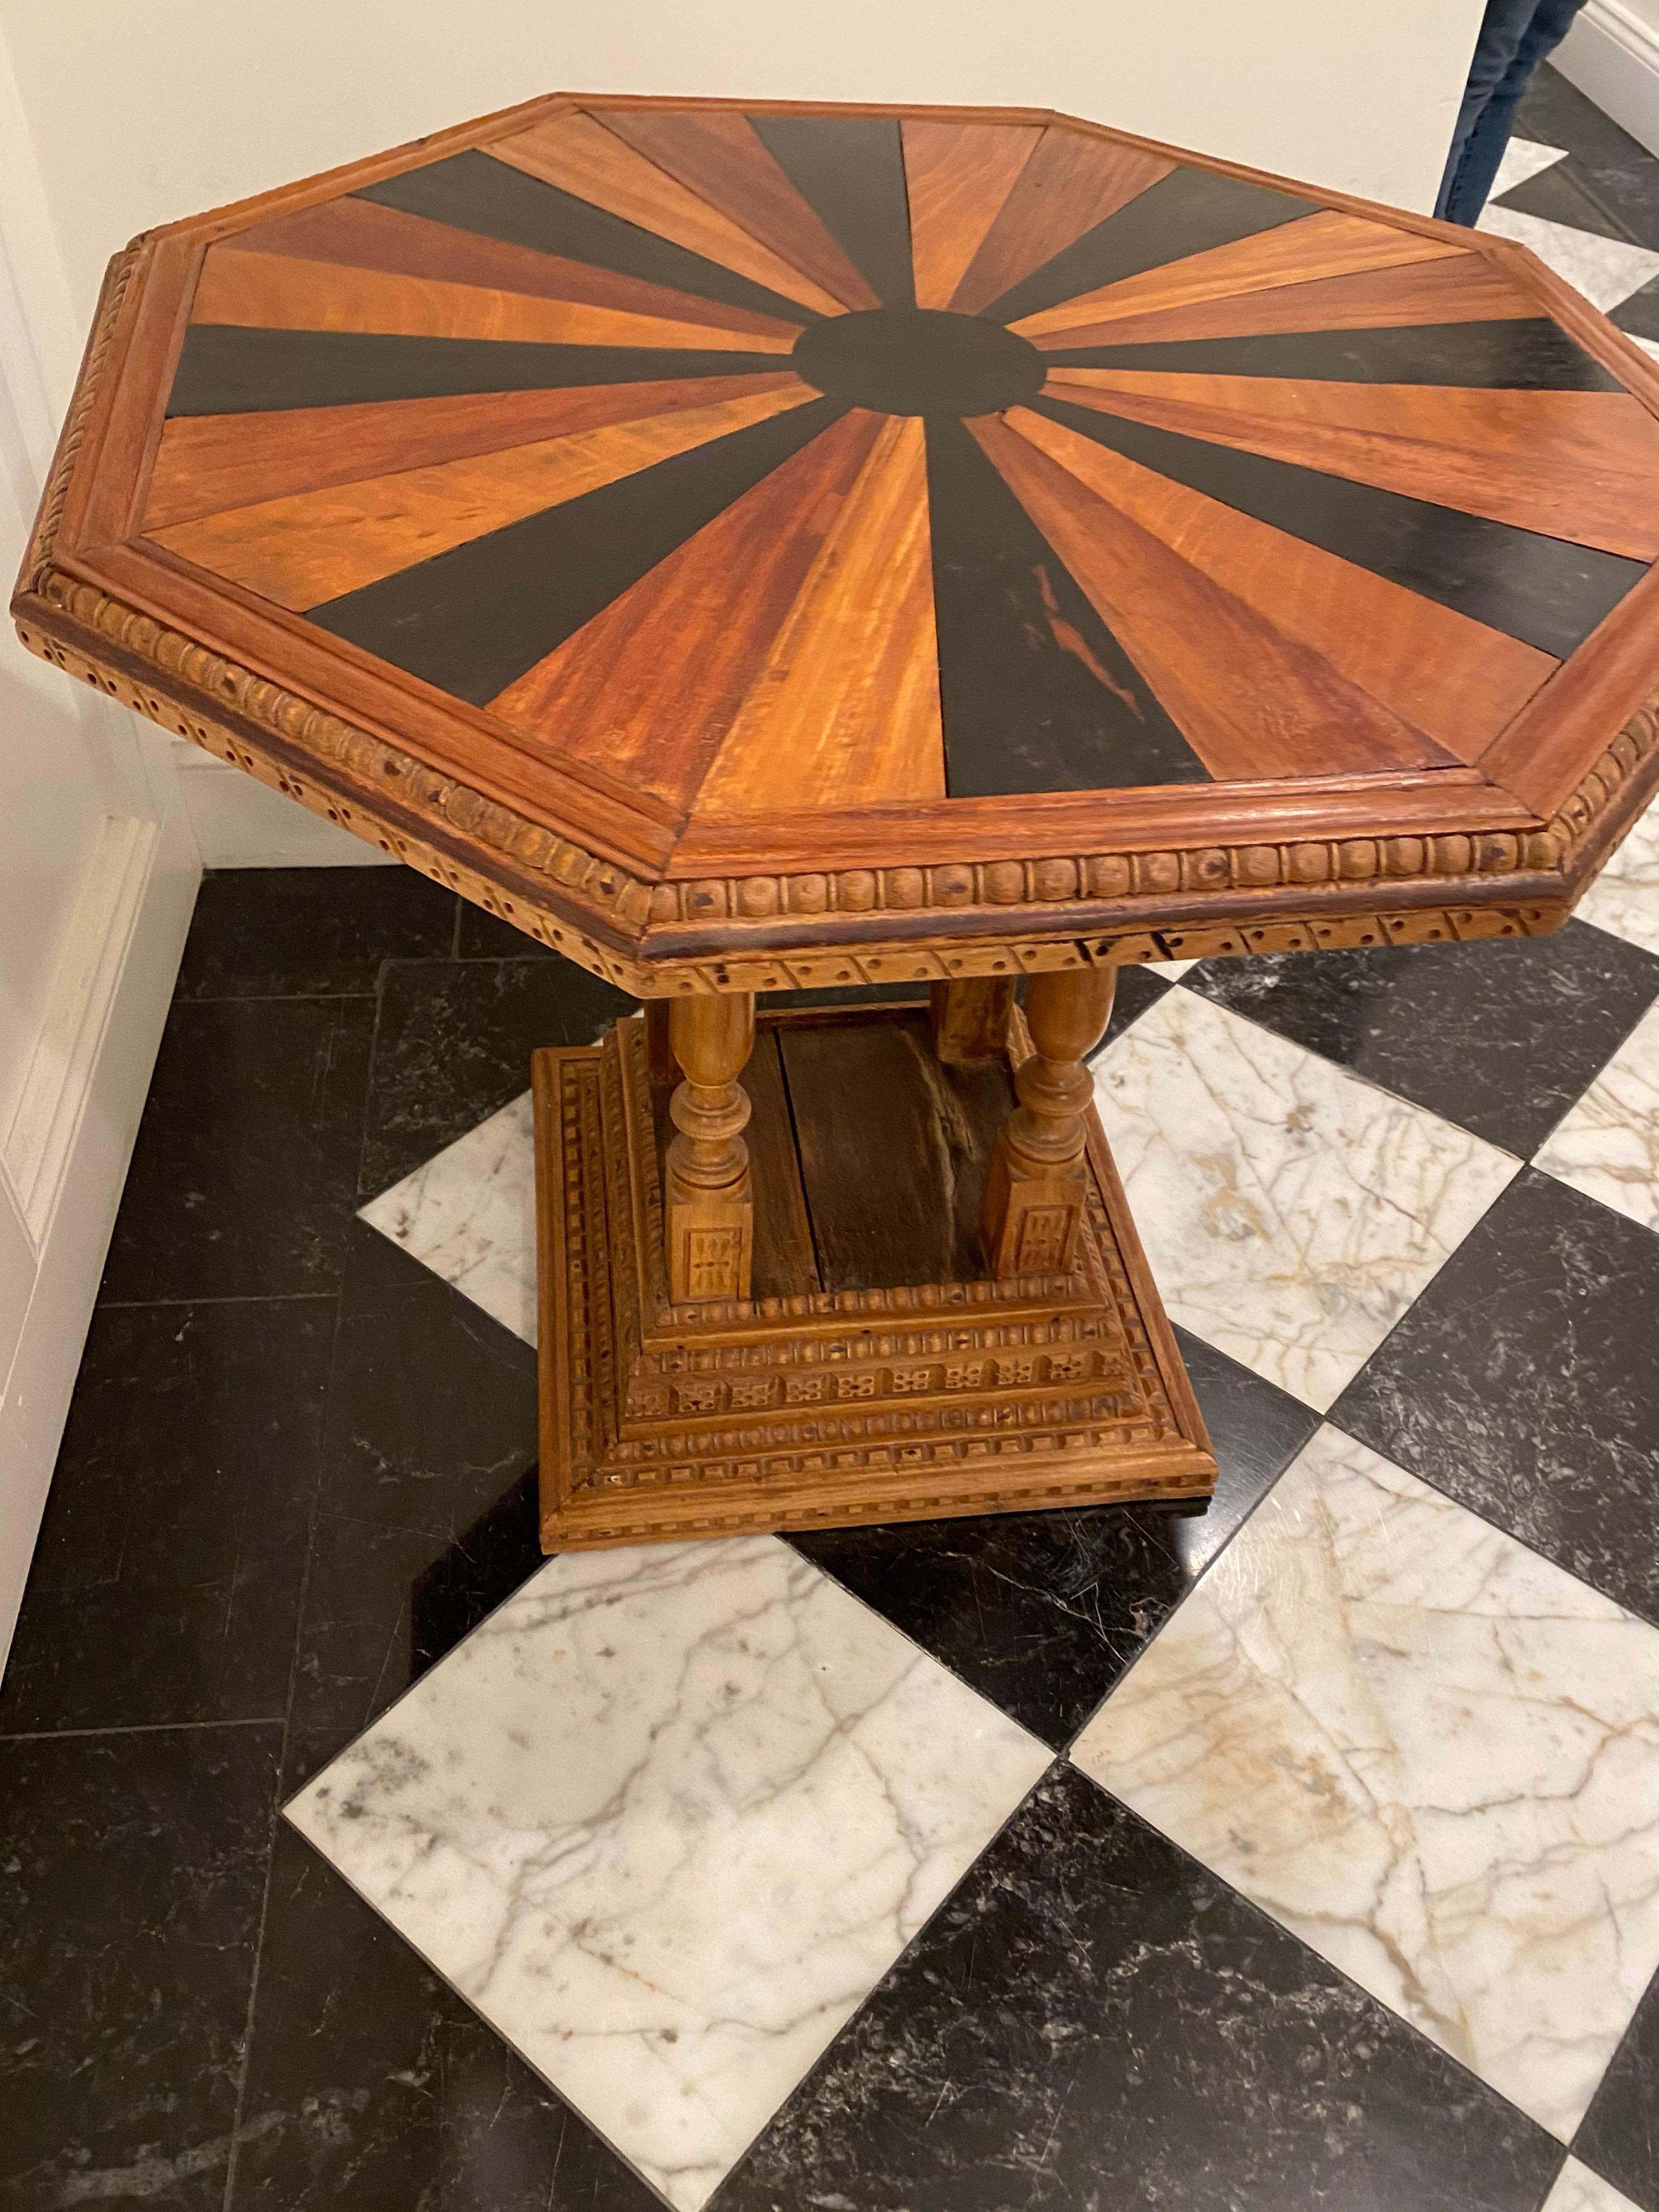 19th century Dutch Ceylonese specimen table, circa 1890. Handmade in the Dutch style with a Ceylonese twist on the base in Sri Lanka. Various woods include: Nadoun, satinwood, mahogany, and ebony inlay. This is a nice height table next to a sofa or